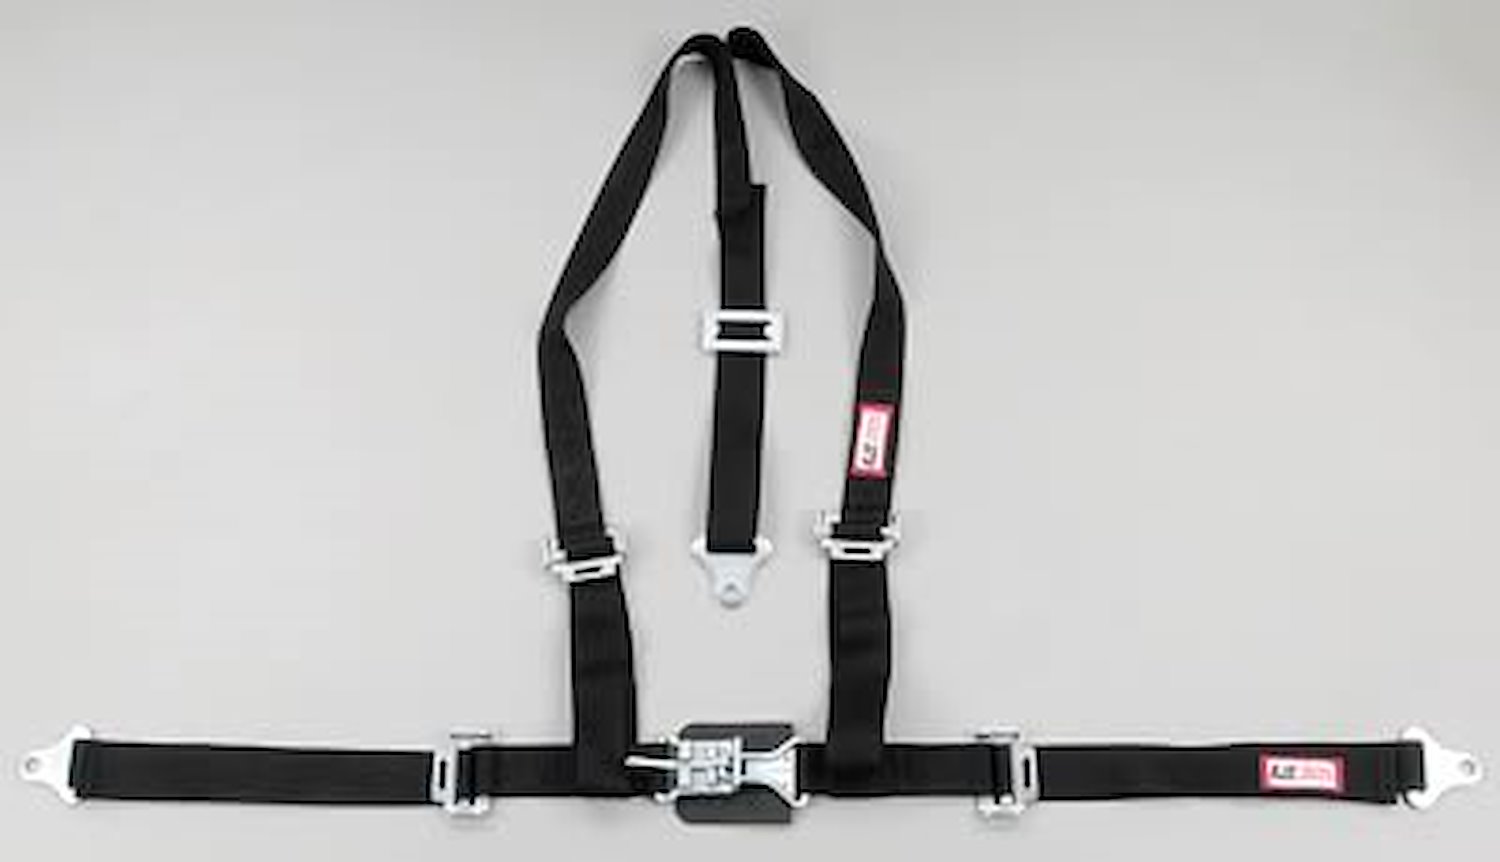 NON-SFI L&L HARNESS 3 PULL UP Lap Belt SEWN IN 2 S.H. Individual ROLL BAR Mount w/STERNUM STRAP ALL WRAP ENDS ORANGE